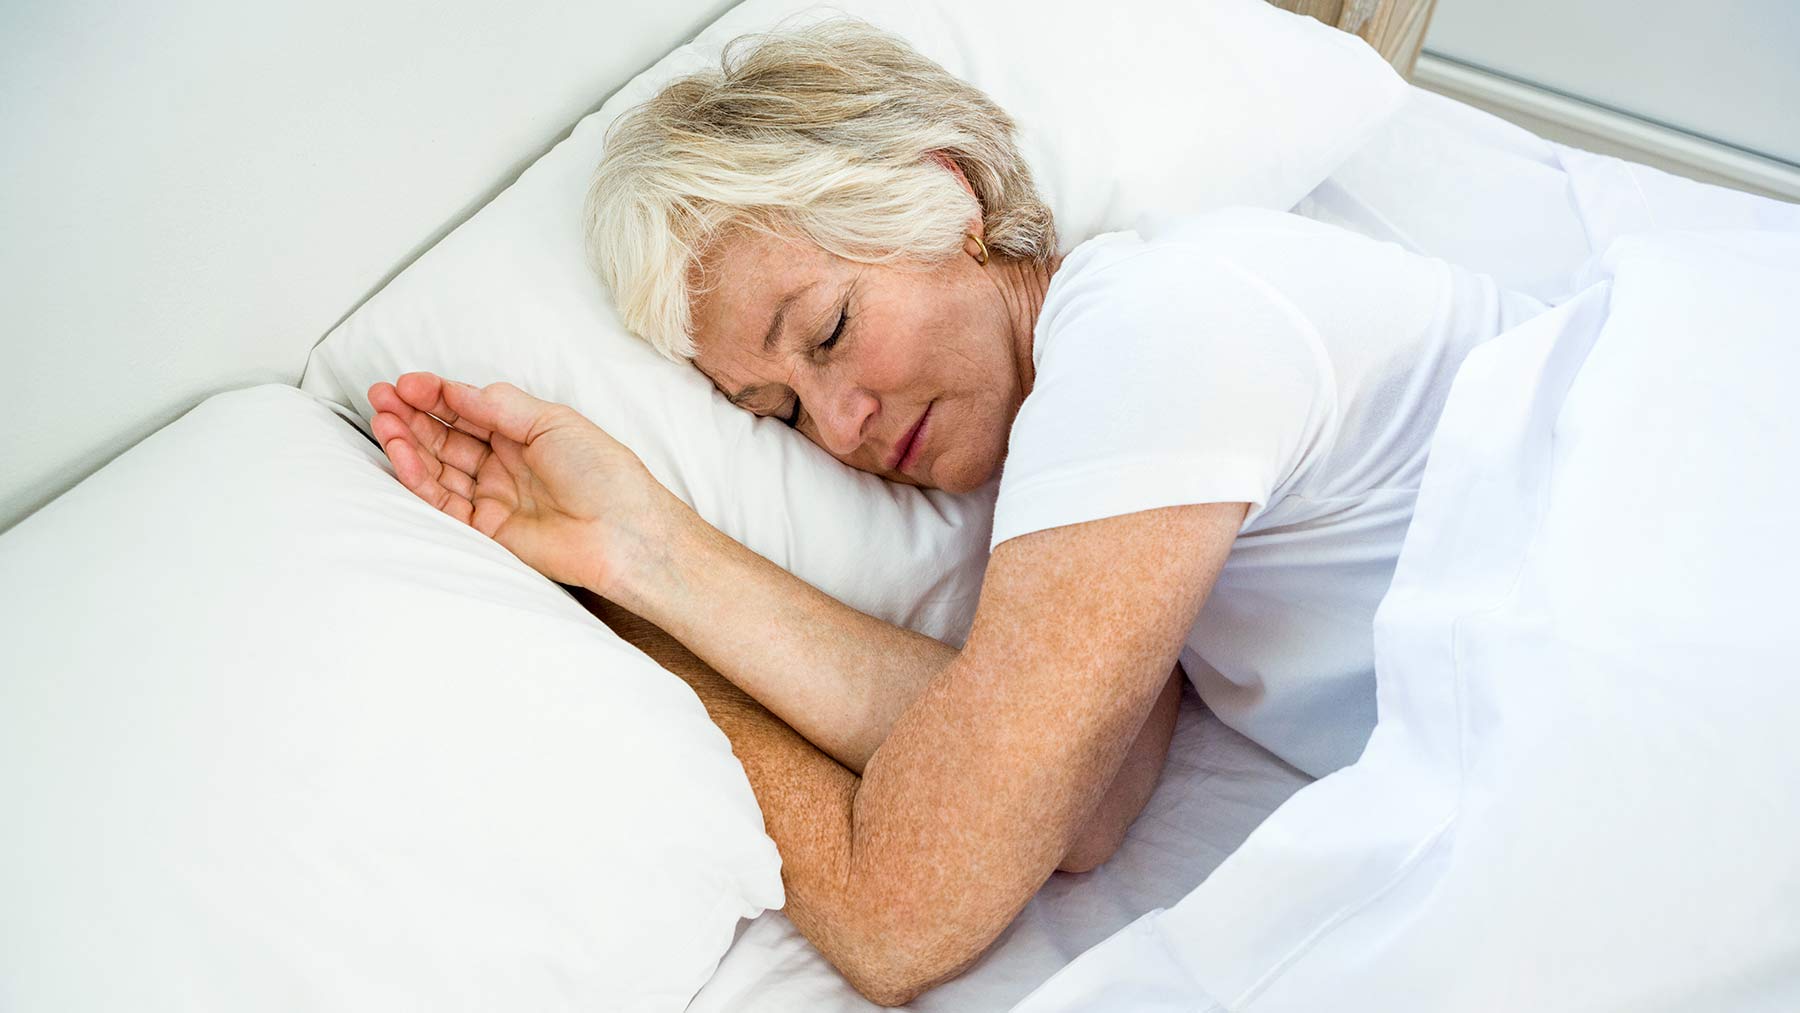 What sleep positions are best for your